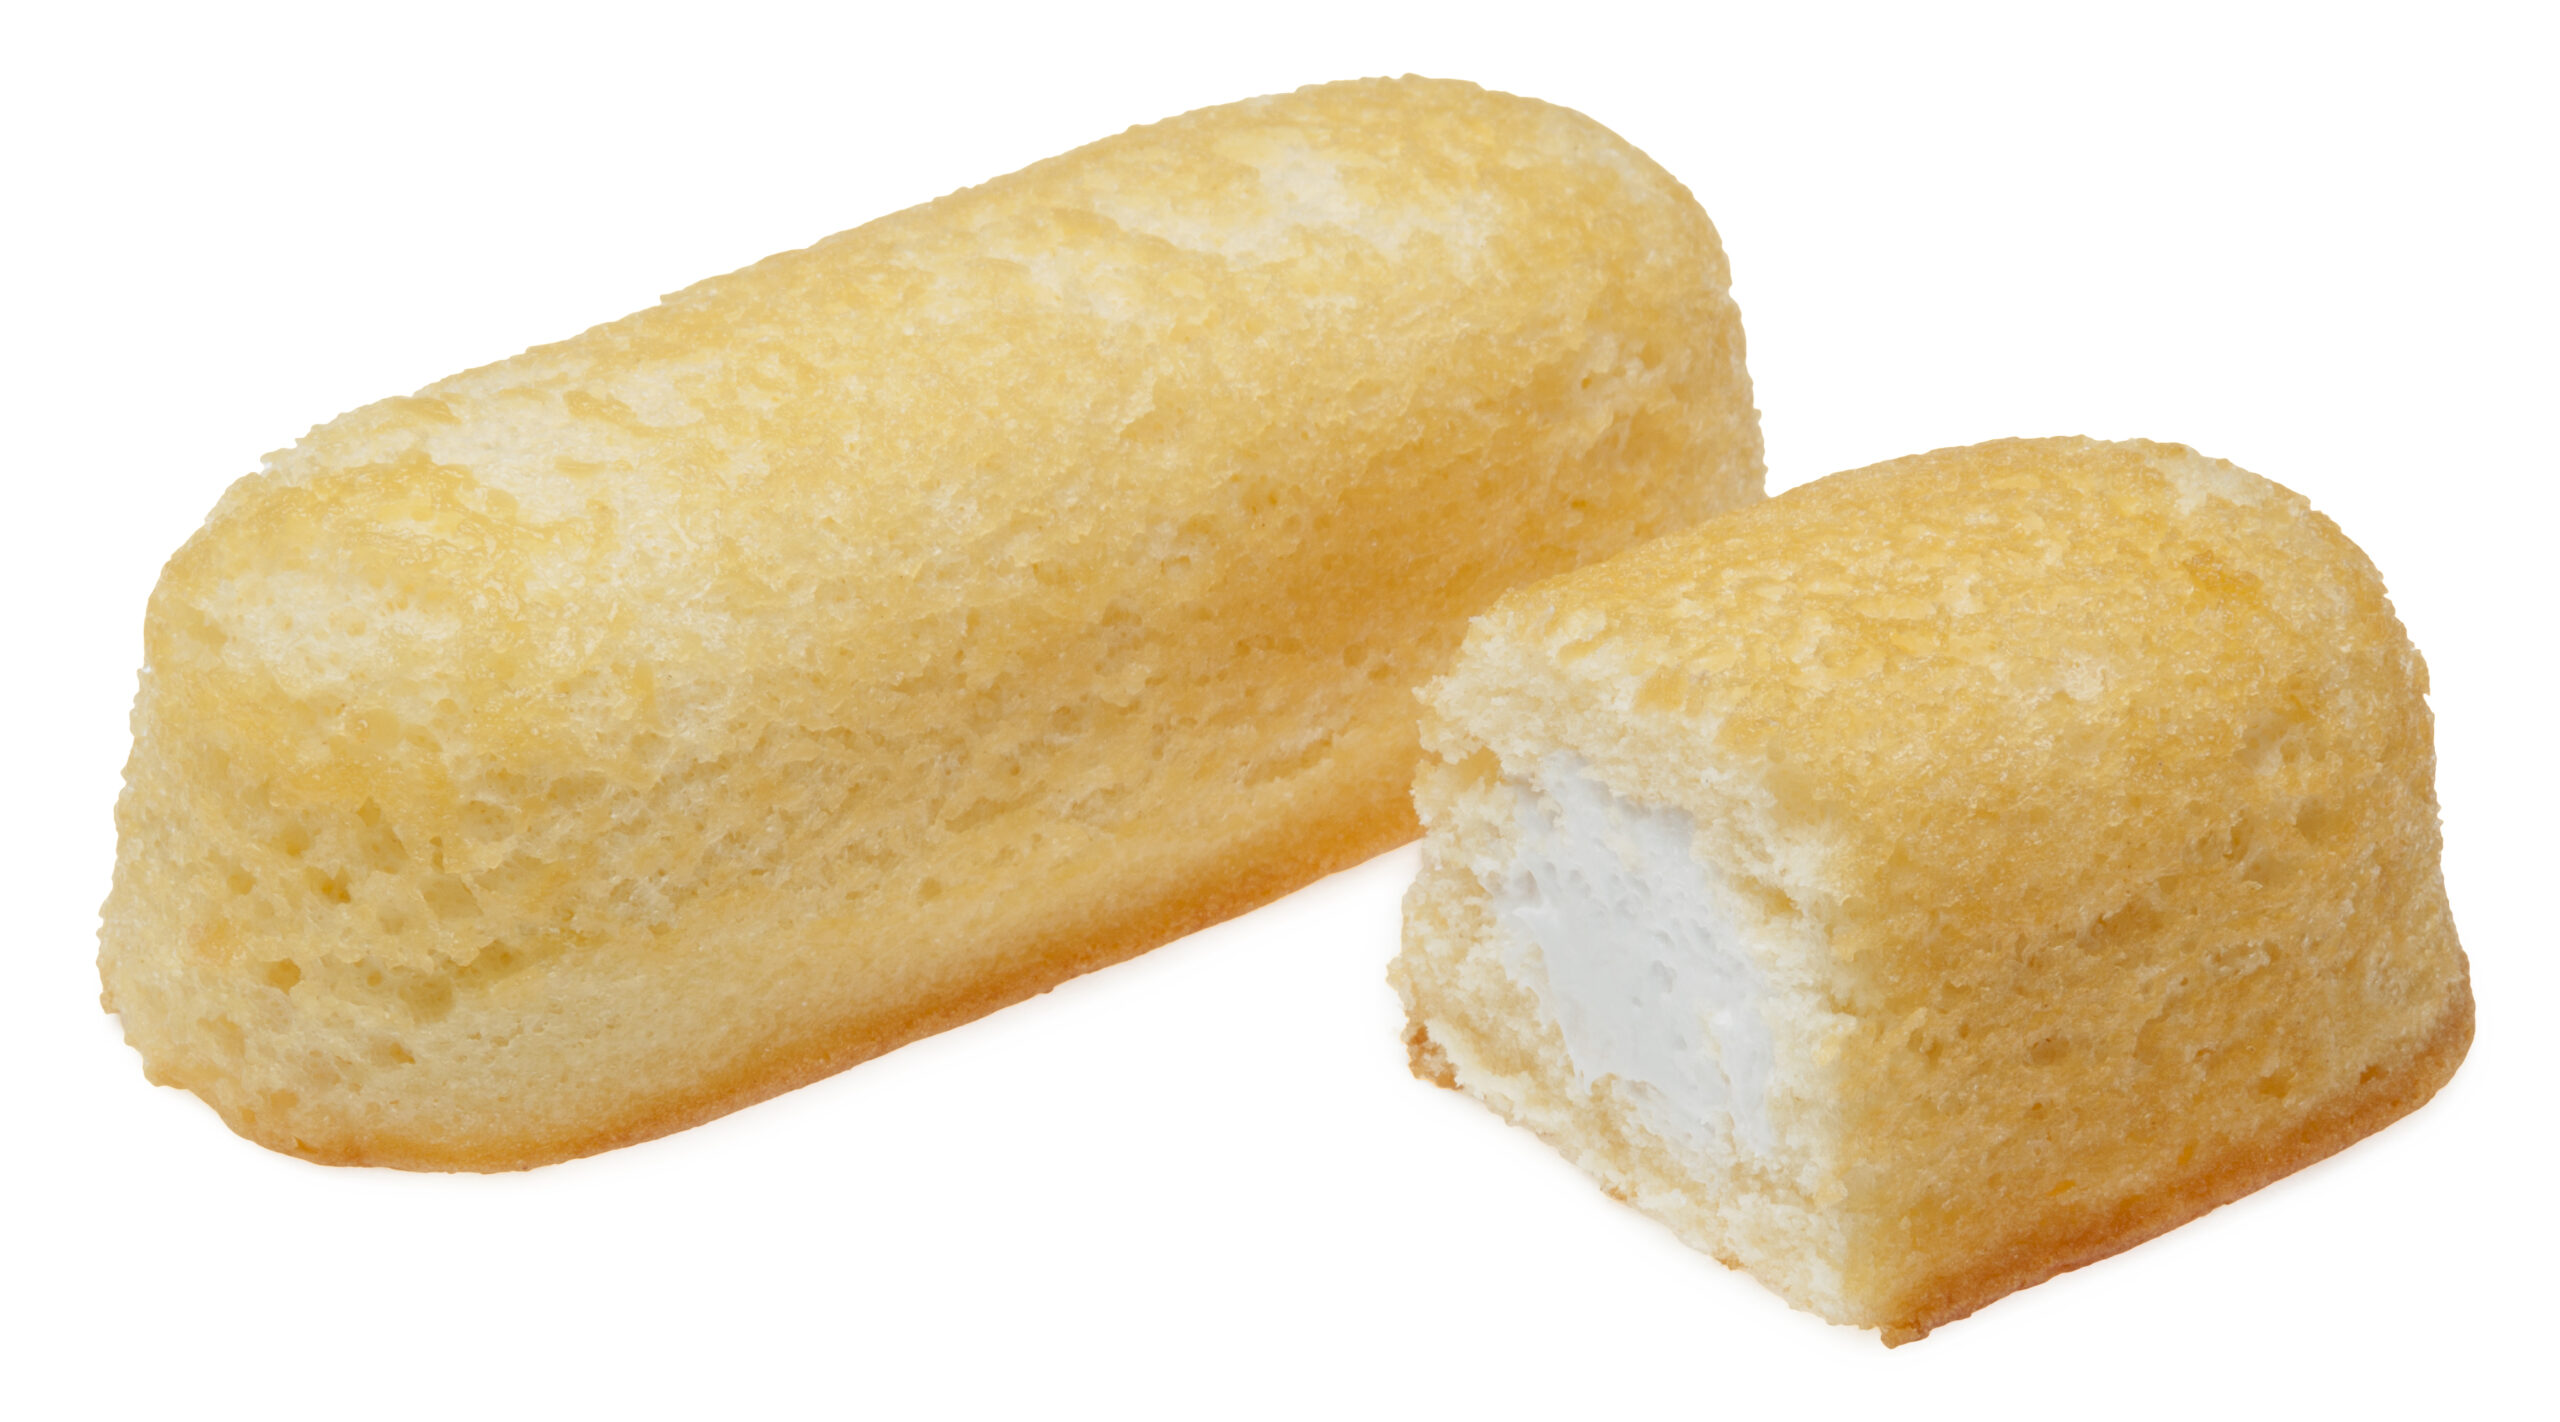 How many calories are in a Twinkie per serving?